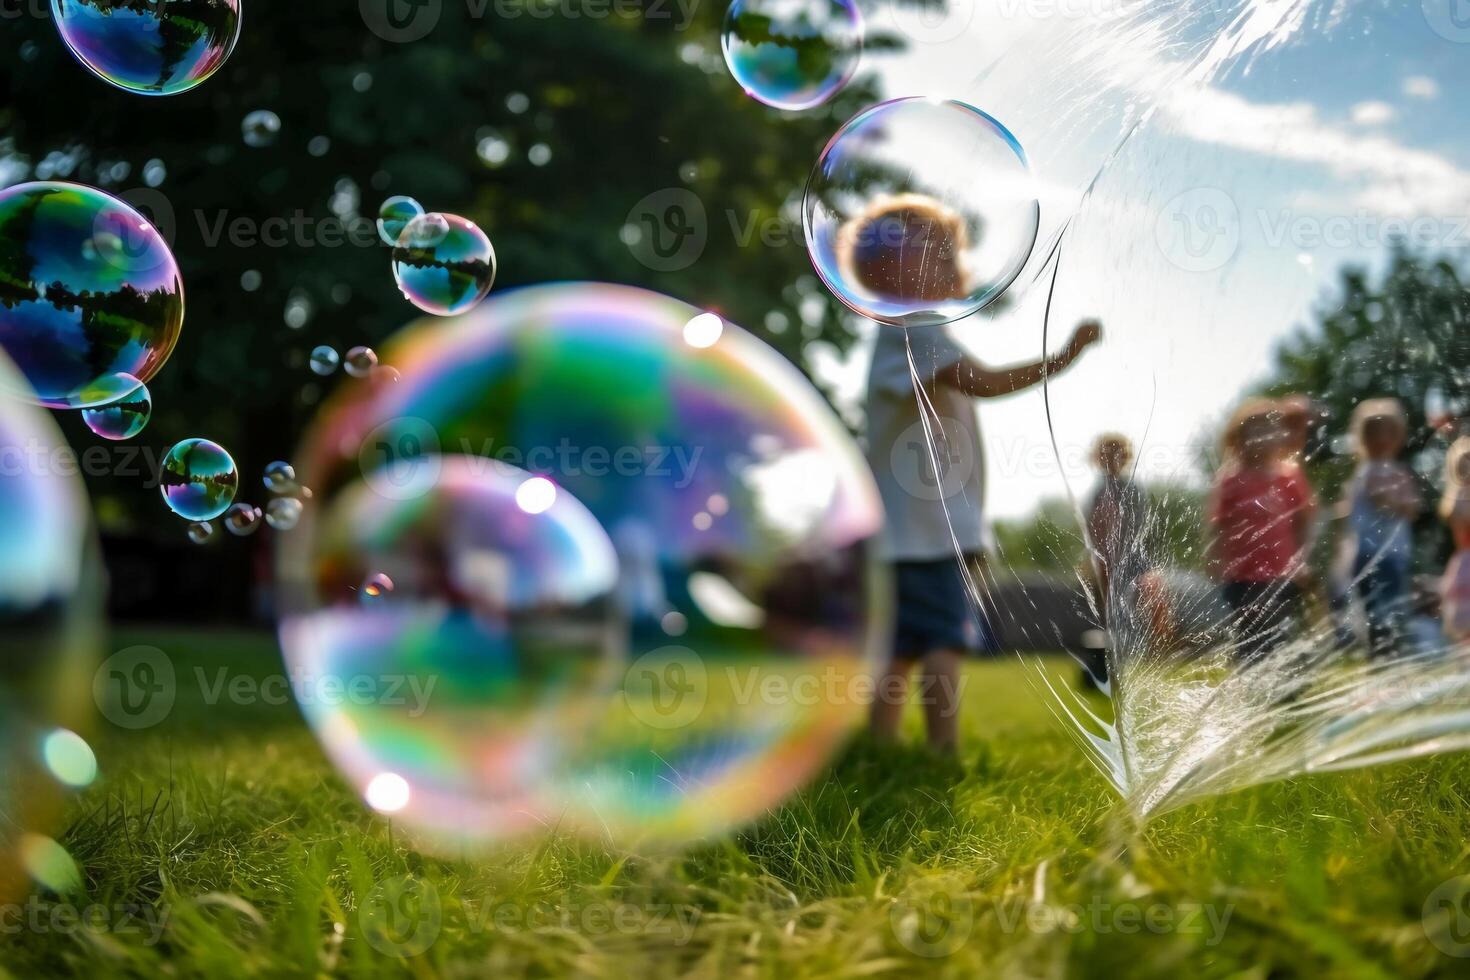 Close up big bubbles blurred background of a child's legs wearing white clothes. photo